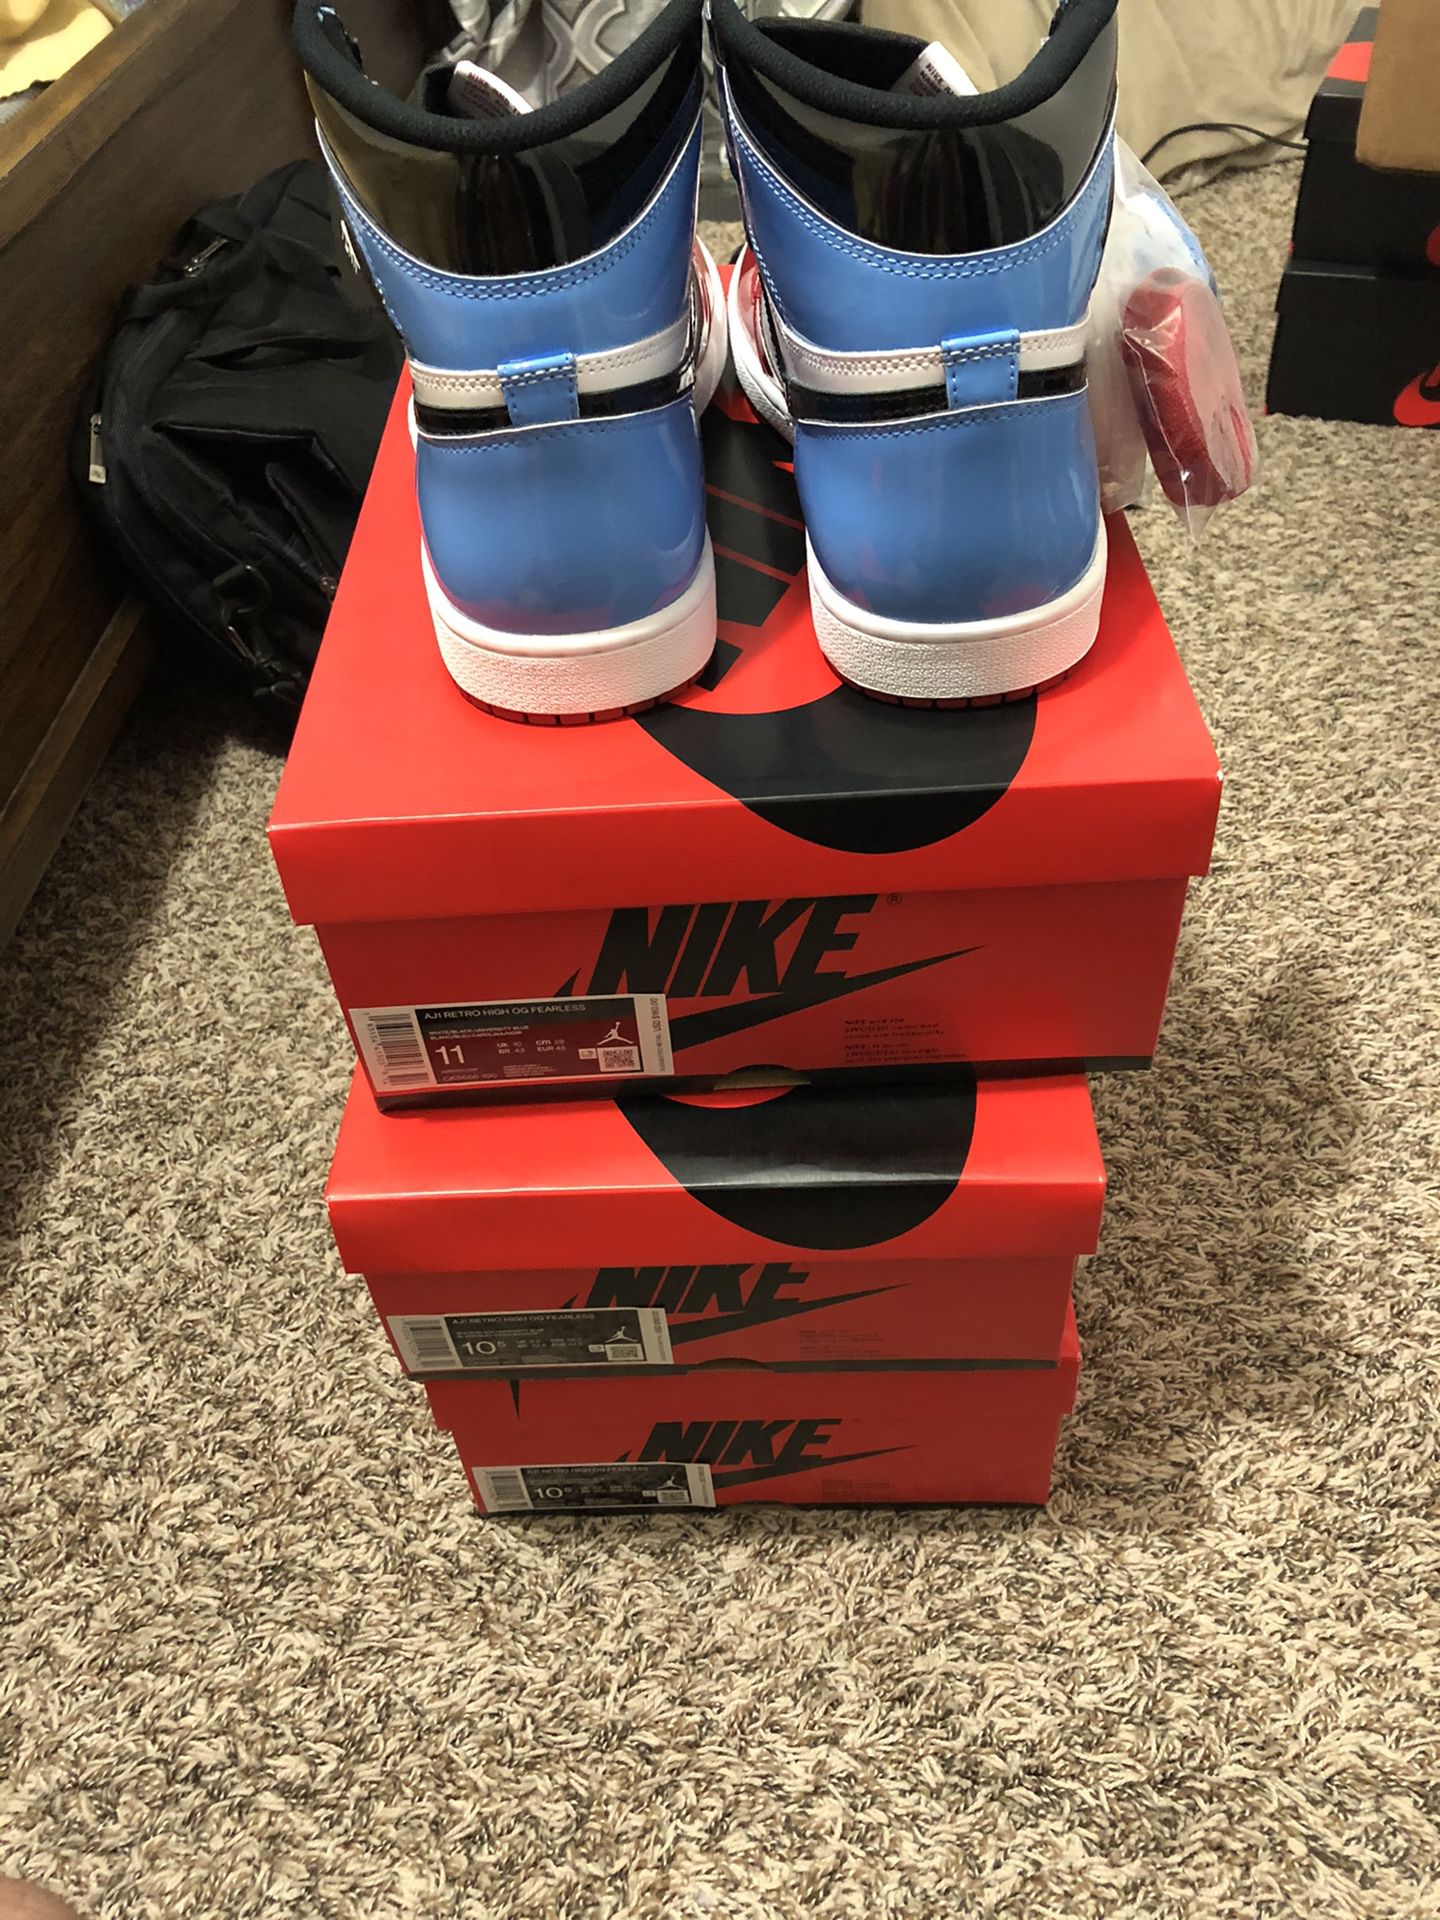 NIKE AIR JORDAN 1 FEARLESS UNC TO CHI SIZE 10.5